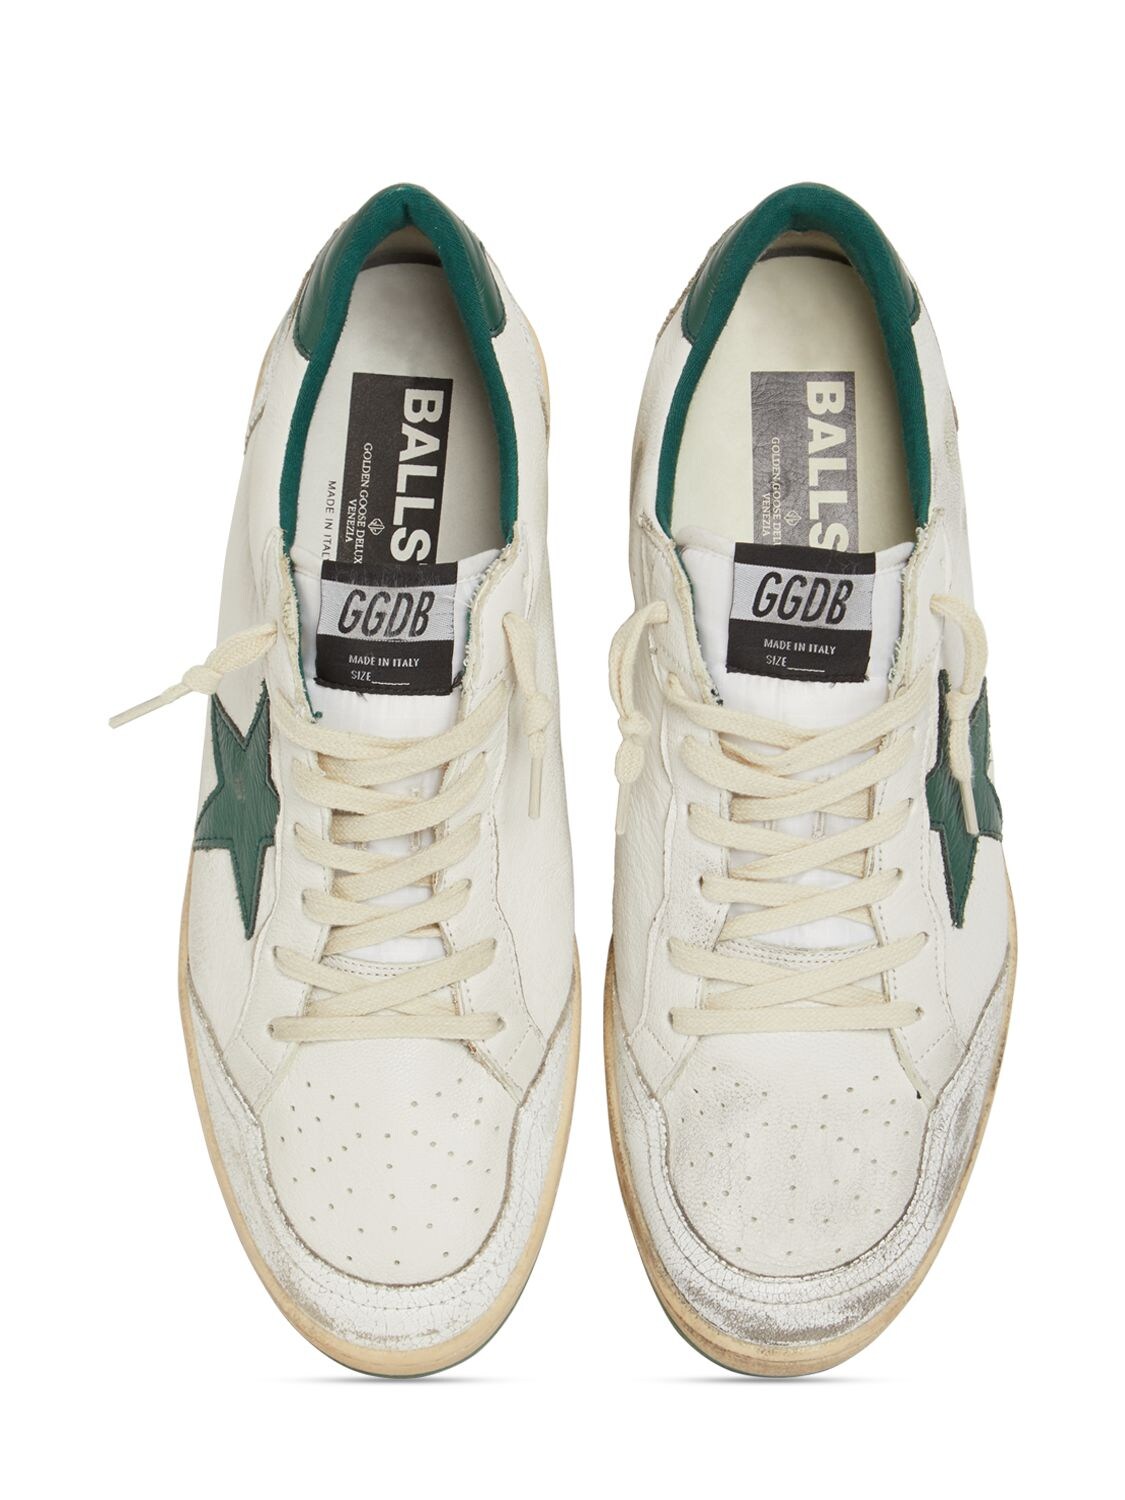 Shop Golden Goose Ball Star Nappa Leather & Nylon Sneakers In White,green